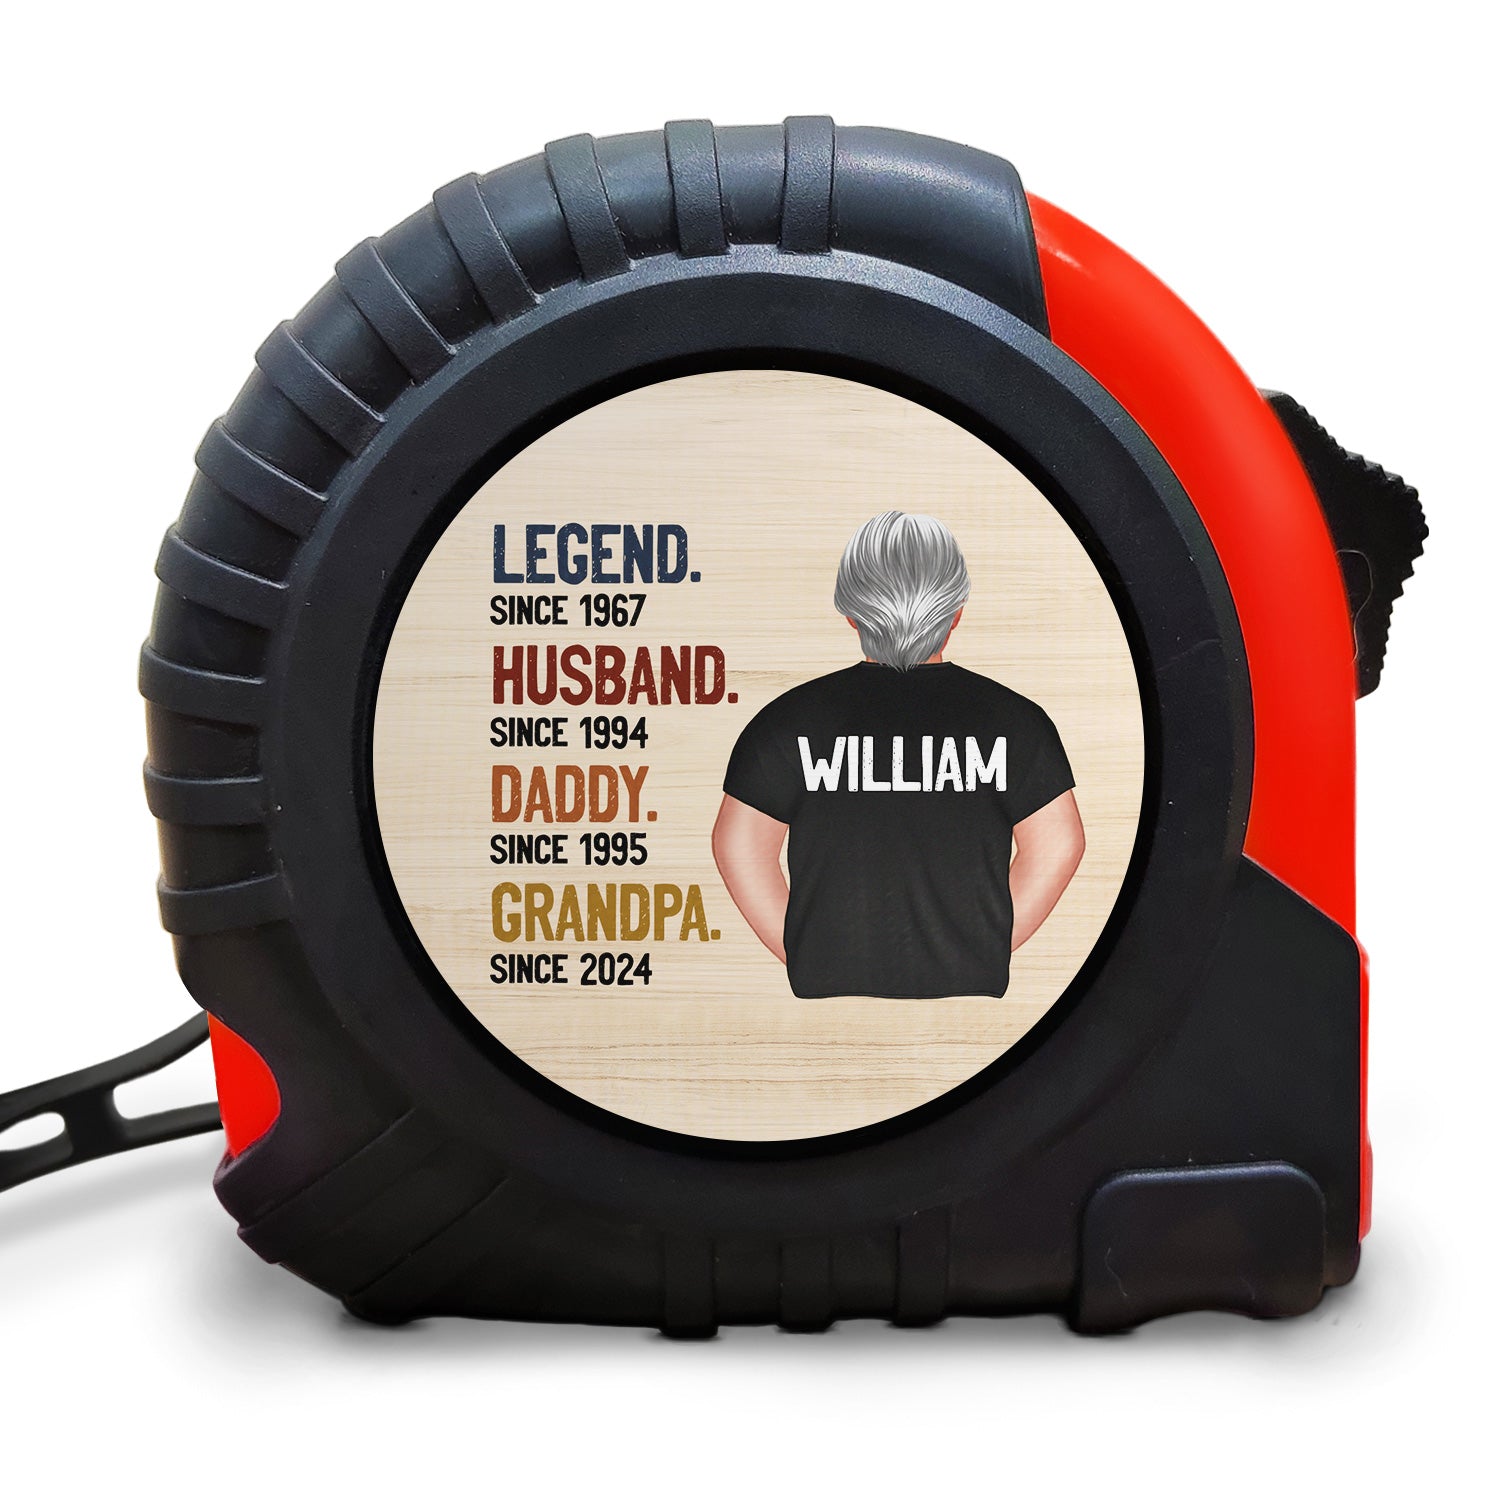 Legend Husband Daddy Grandpa - Birthday, Loving Gift For Dad, Father, Grandfather - Personalized Tape Measure